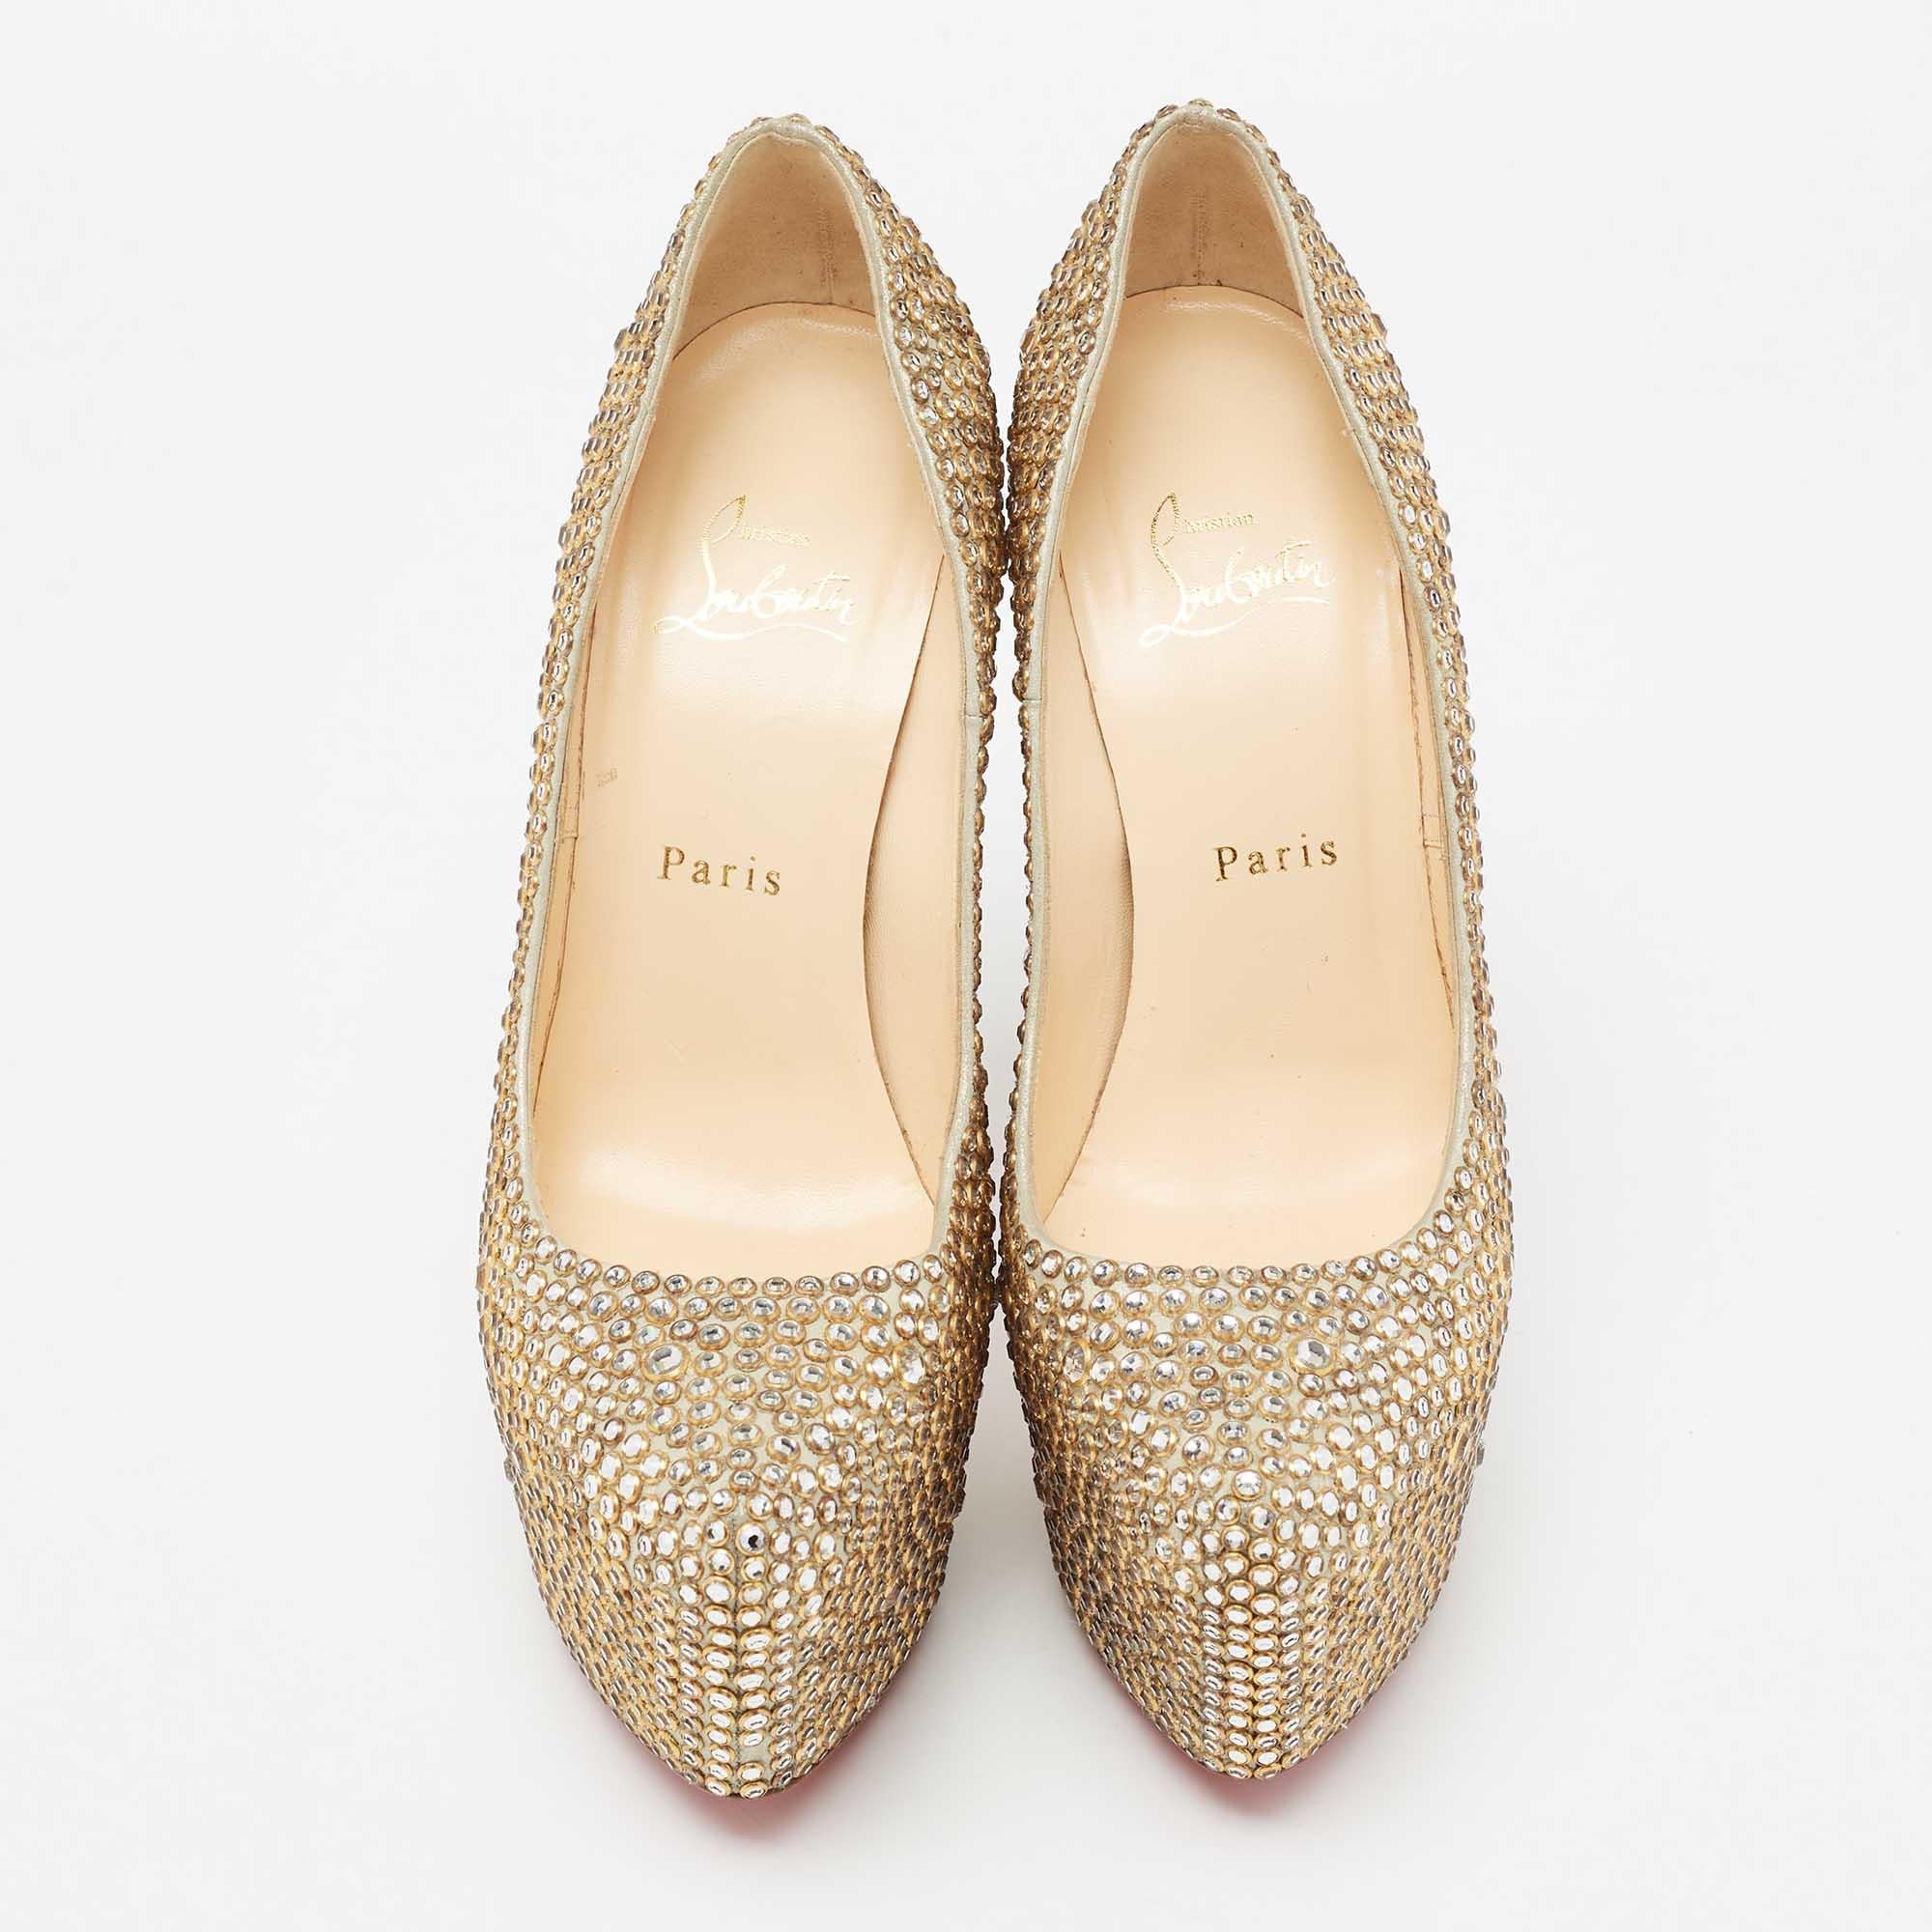 Christian Louboutin Crystal Embellished Leather Daffodile Pumps Size 38.5 In Good Condition For Sale In Dubai, Al Qouz 2